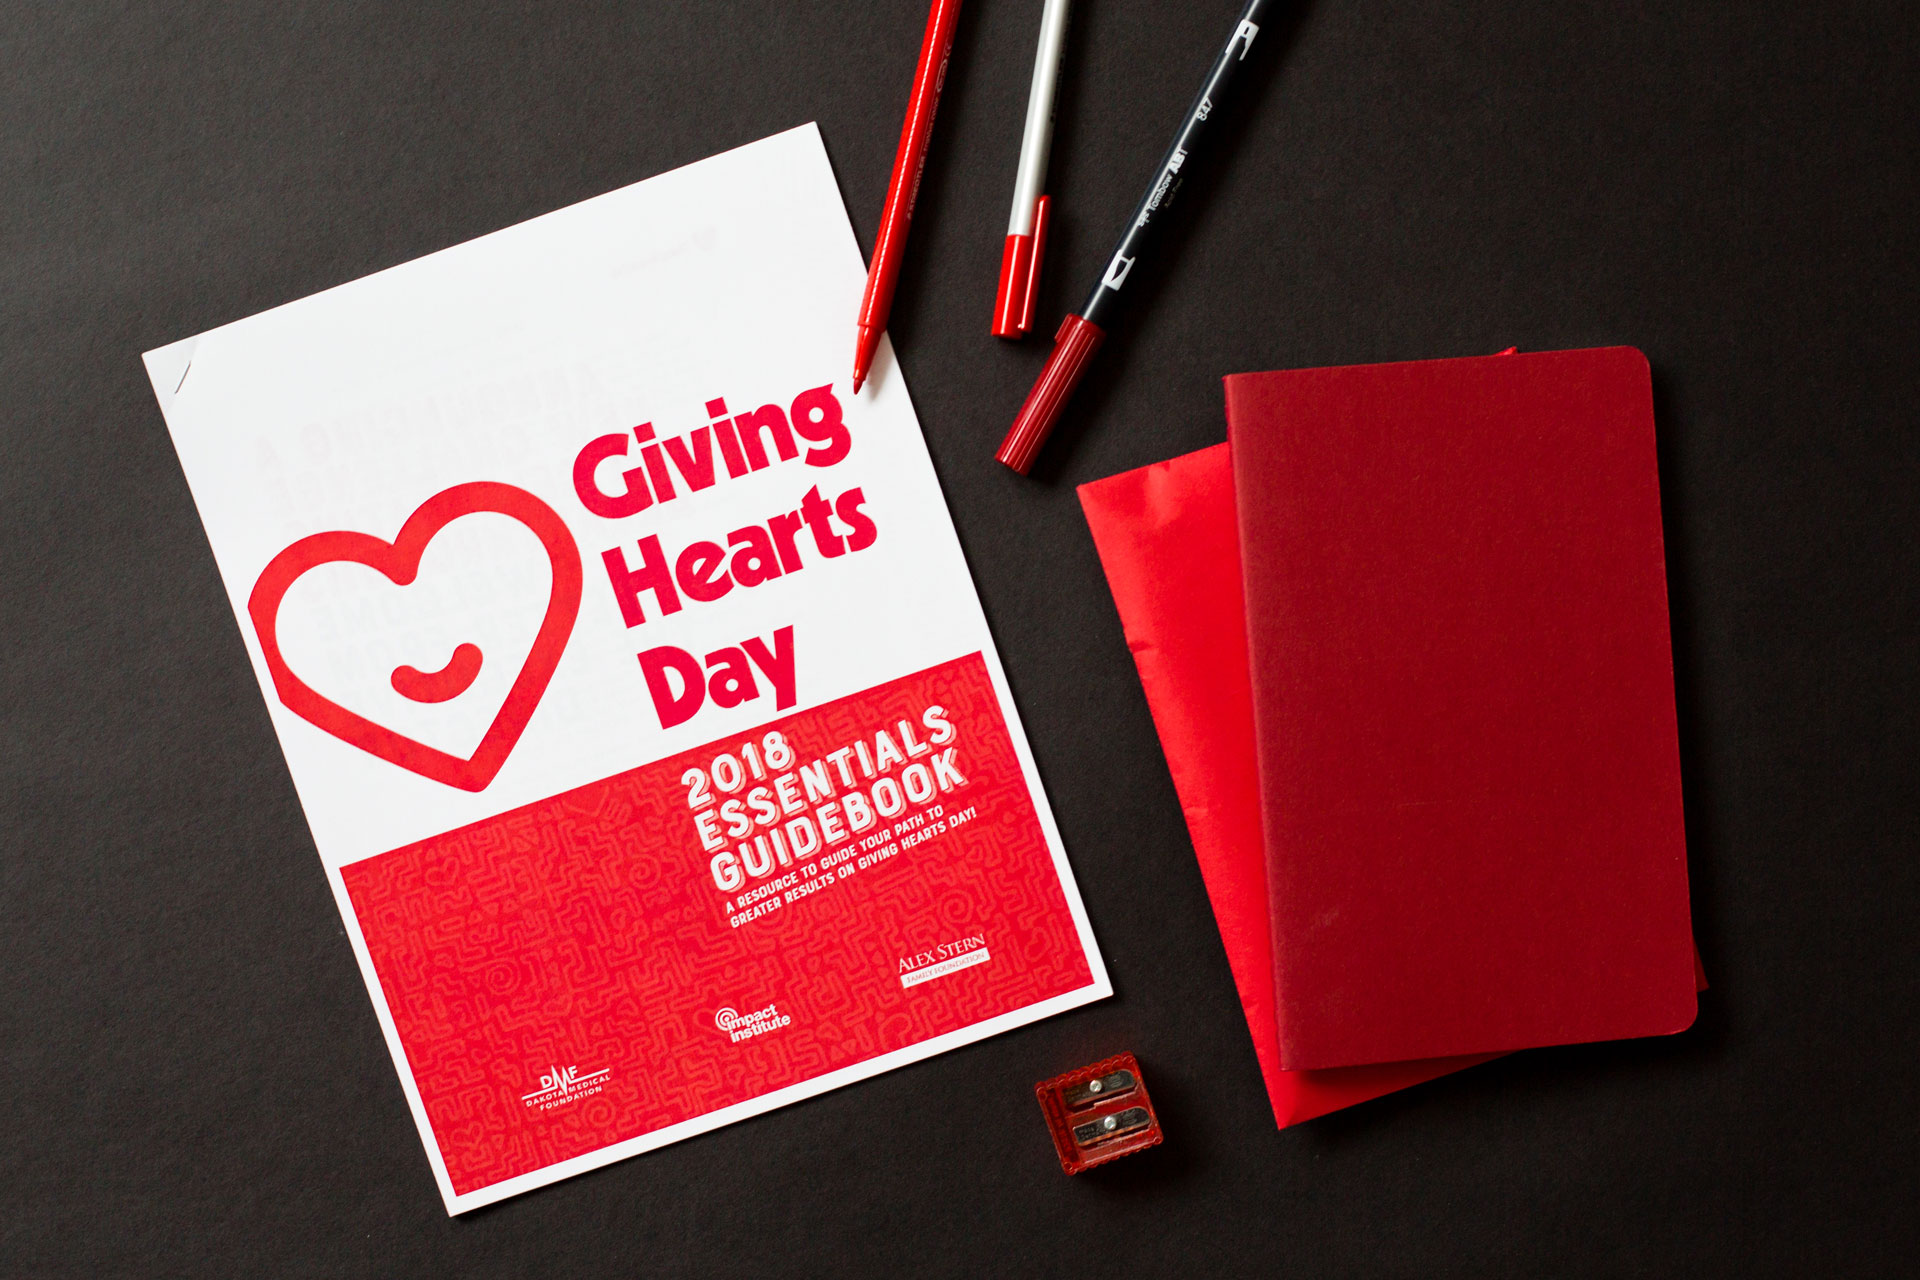 Giving Hearts Day 2018 Essentials Guidebook printed laying on a dark background next to red journals and markers